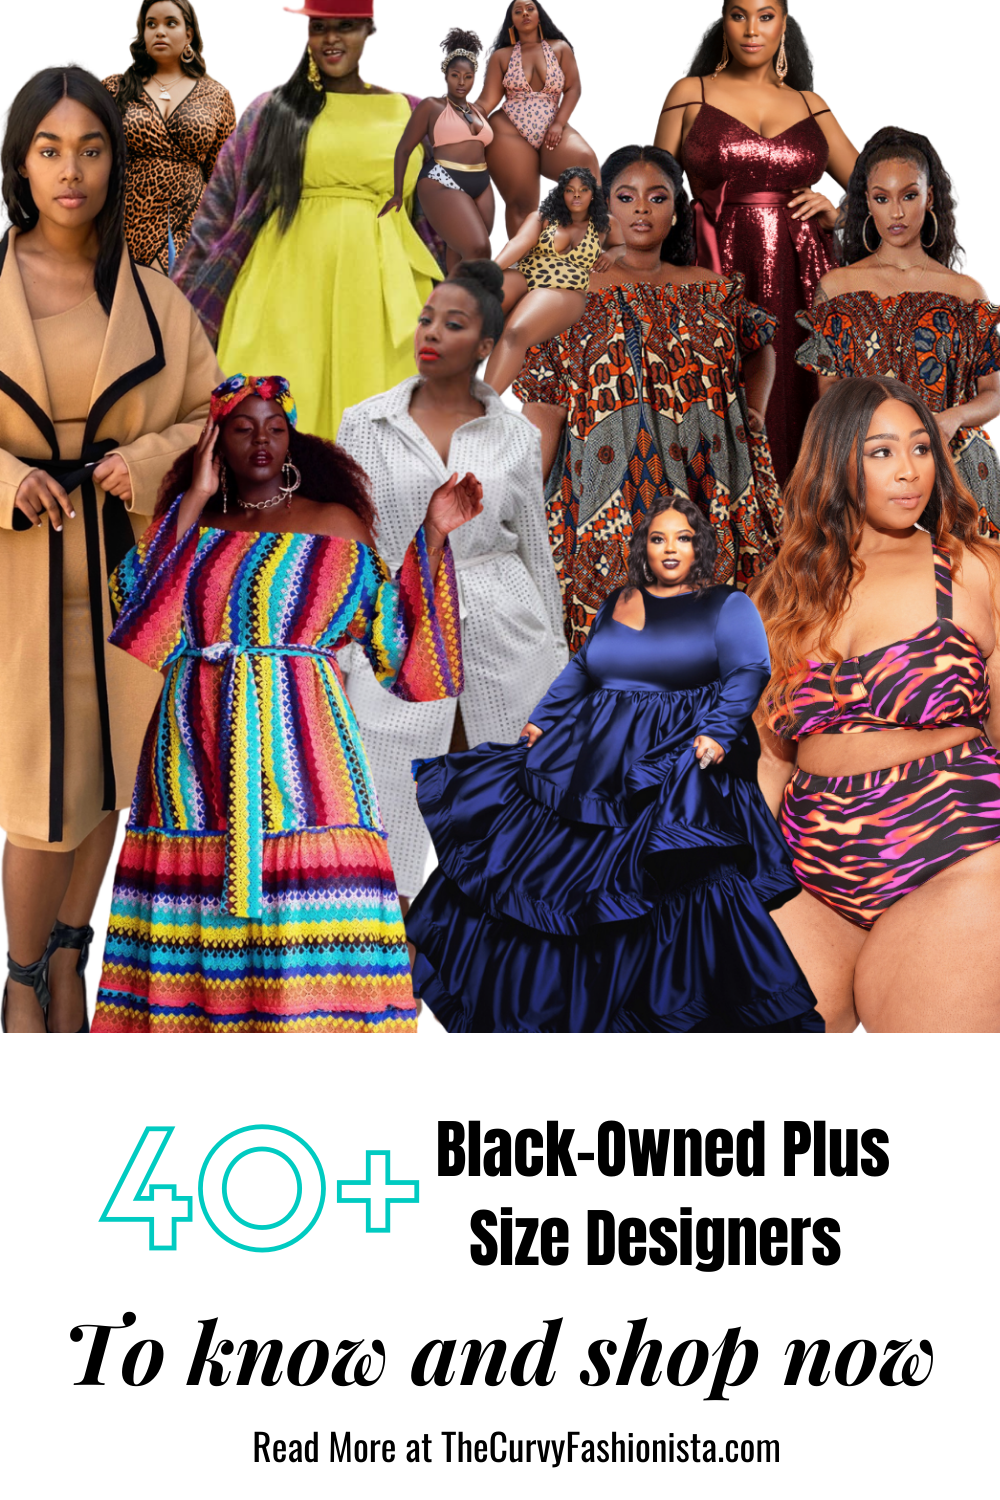 40+ Black owned Plus Size Designers